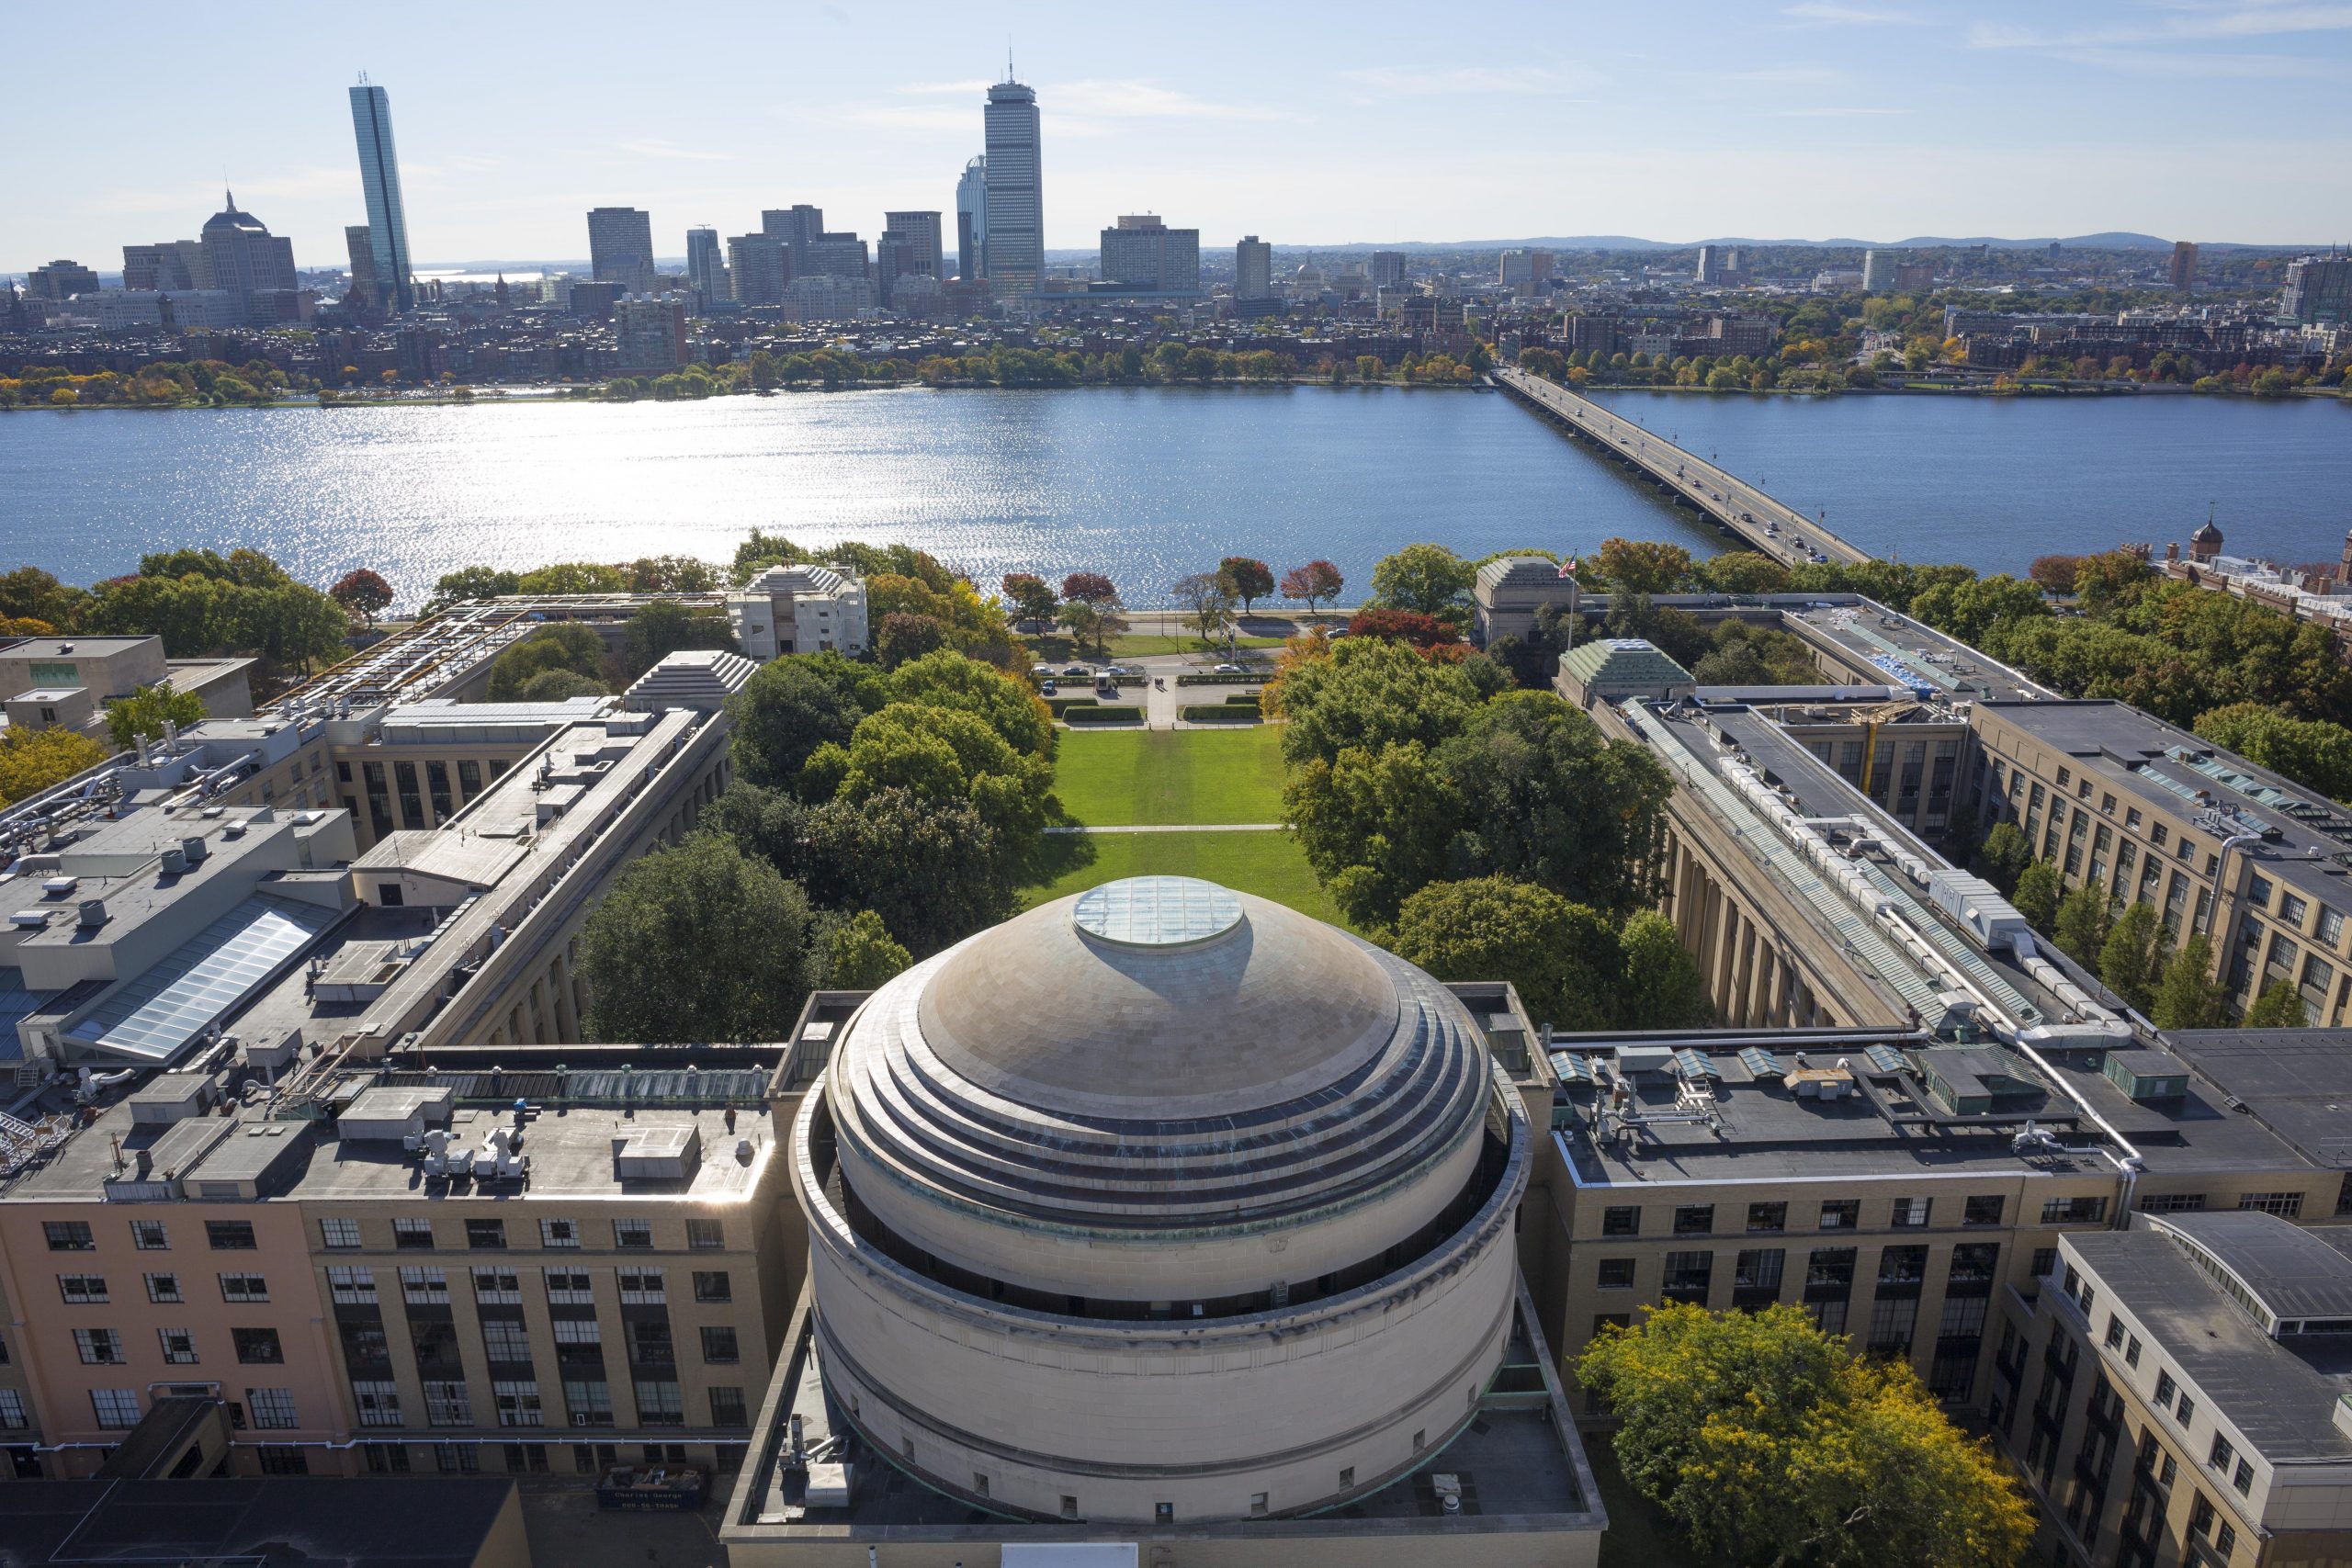 MIT dome aerial view with Charles River and Boston skyline